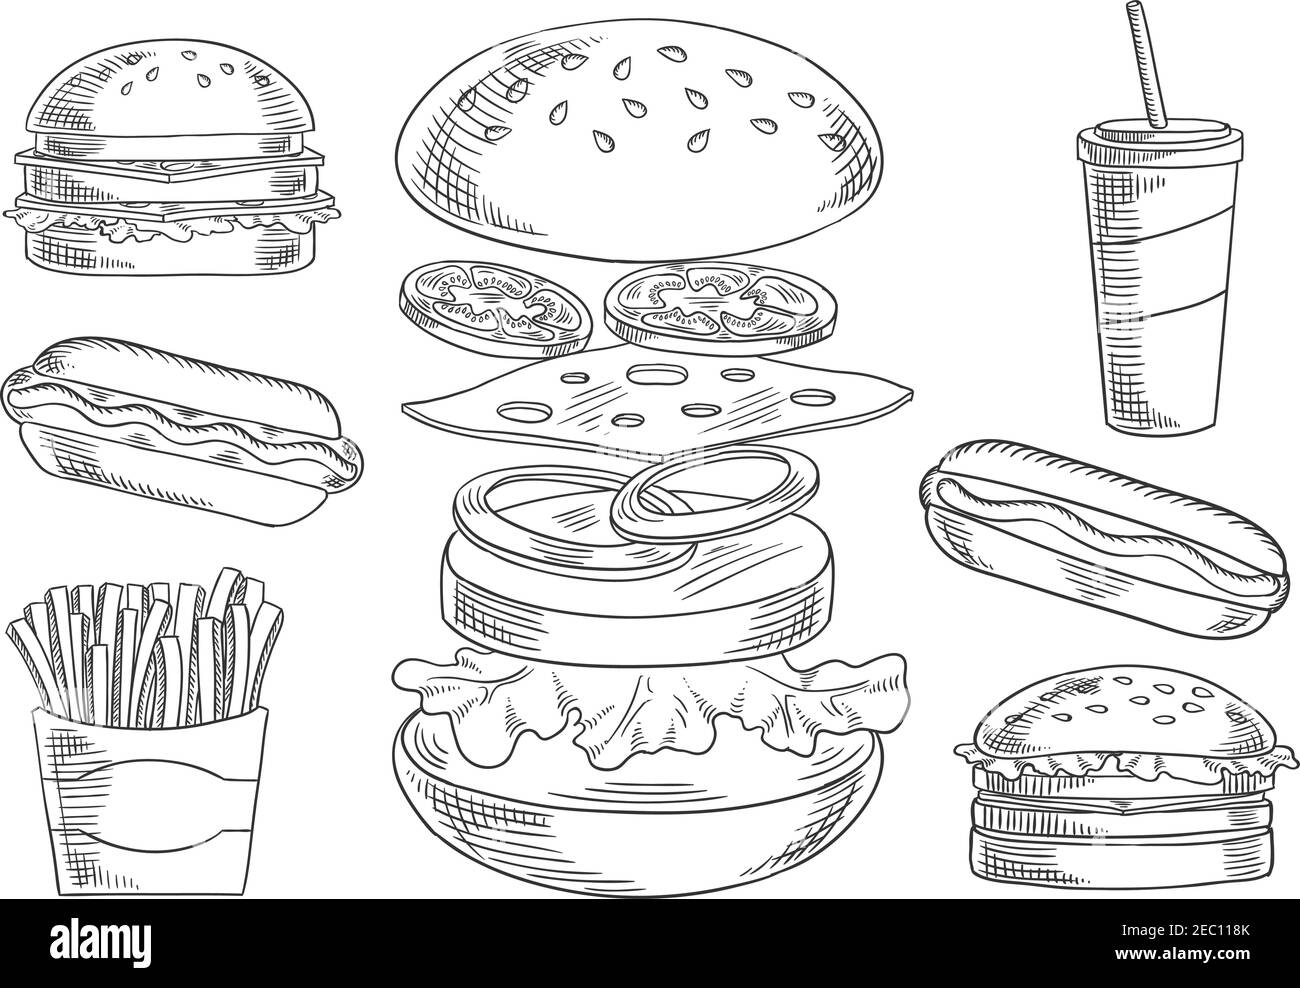 Fast food sketch icons of appetizing cheeseburger with separated layers of fresh tomato and onion, cheese, meat patty and lettuce, surrounded by hot d Stock Vector